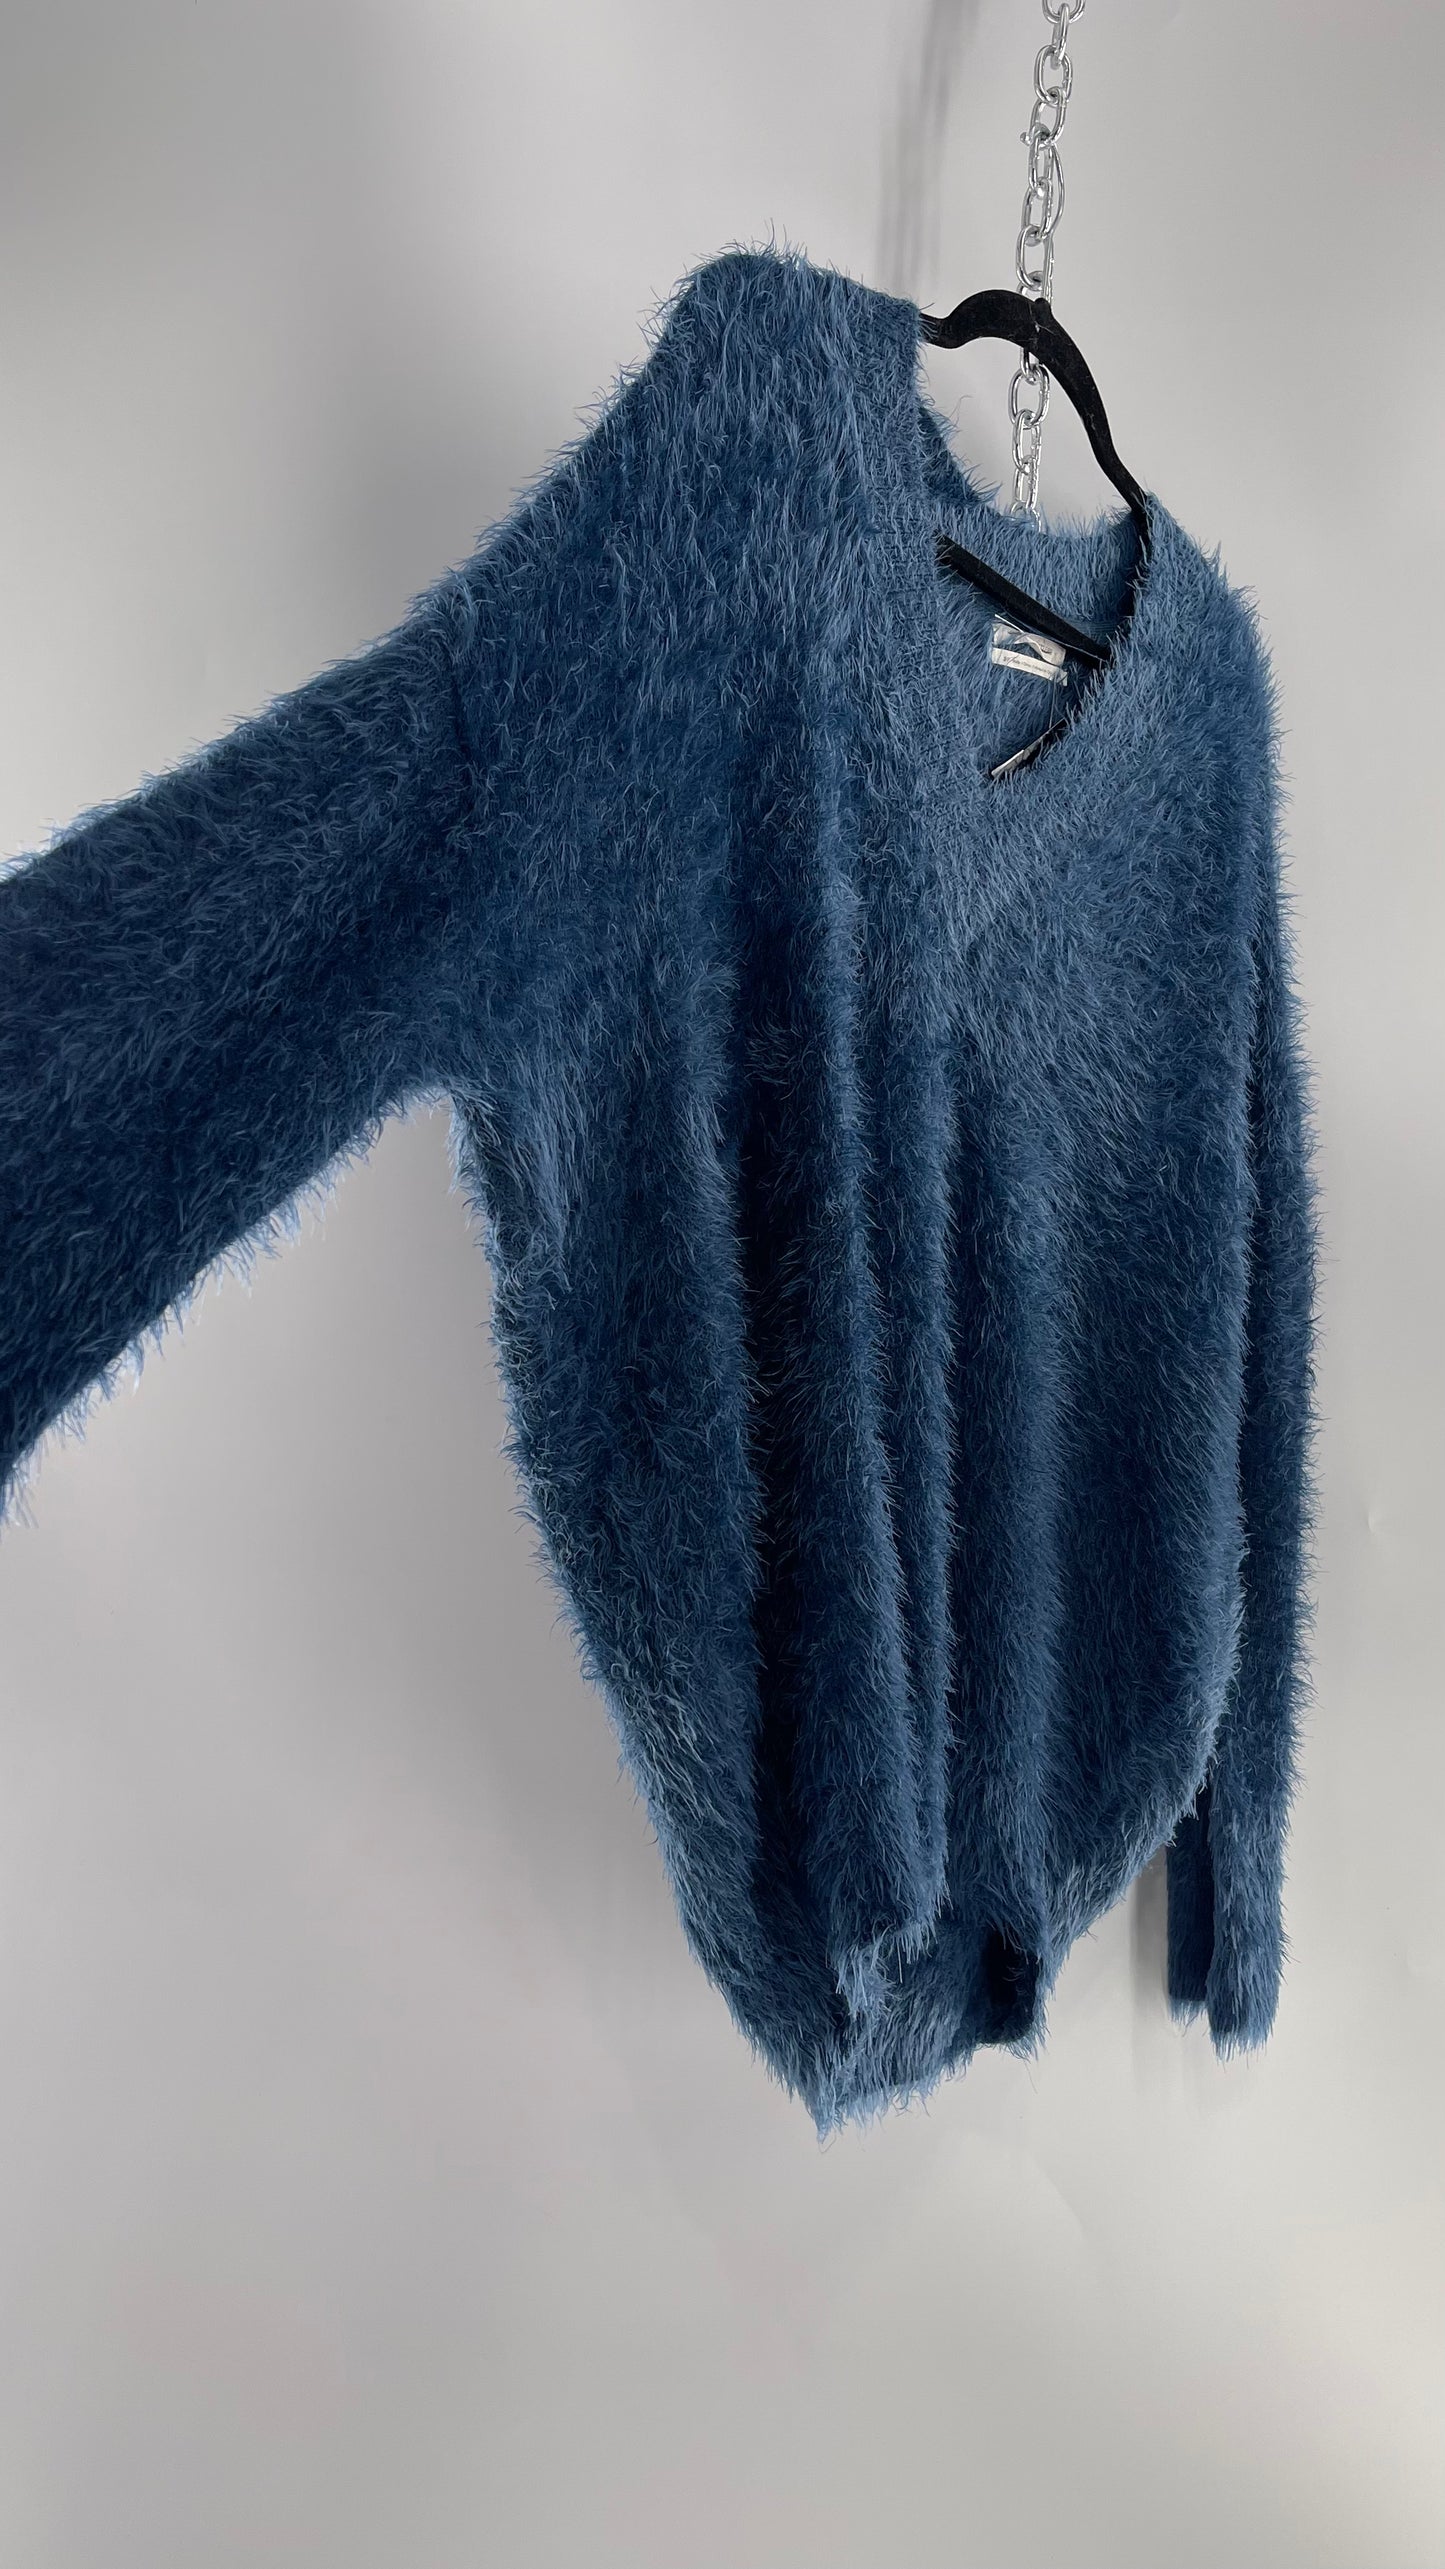 Urban Outfitters Blue Shaggy/Fuzzy Slouchy Sweater (Small)